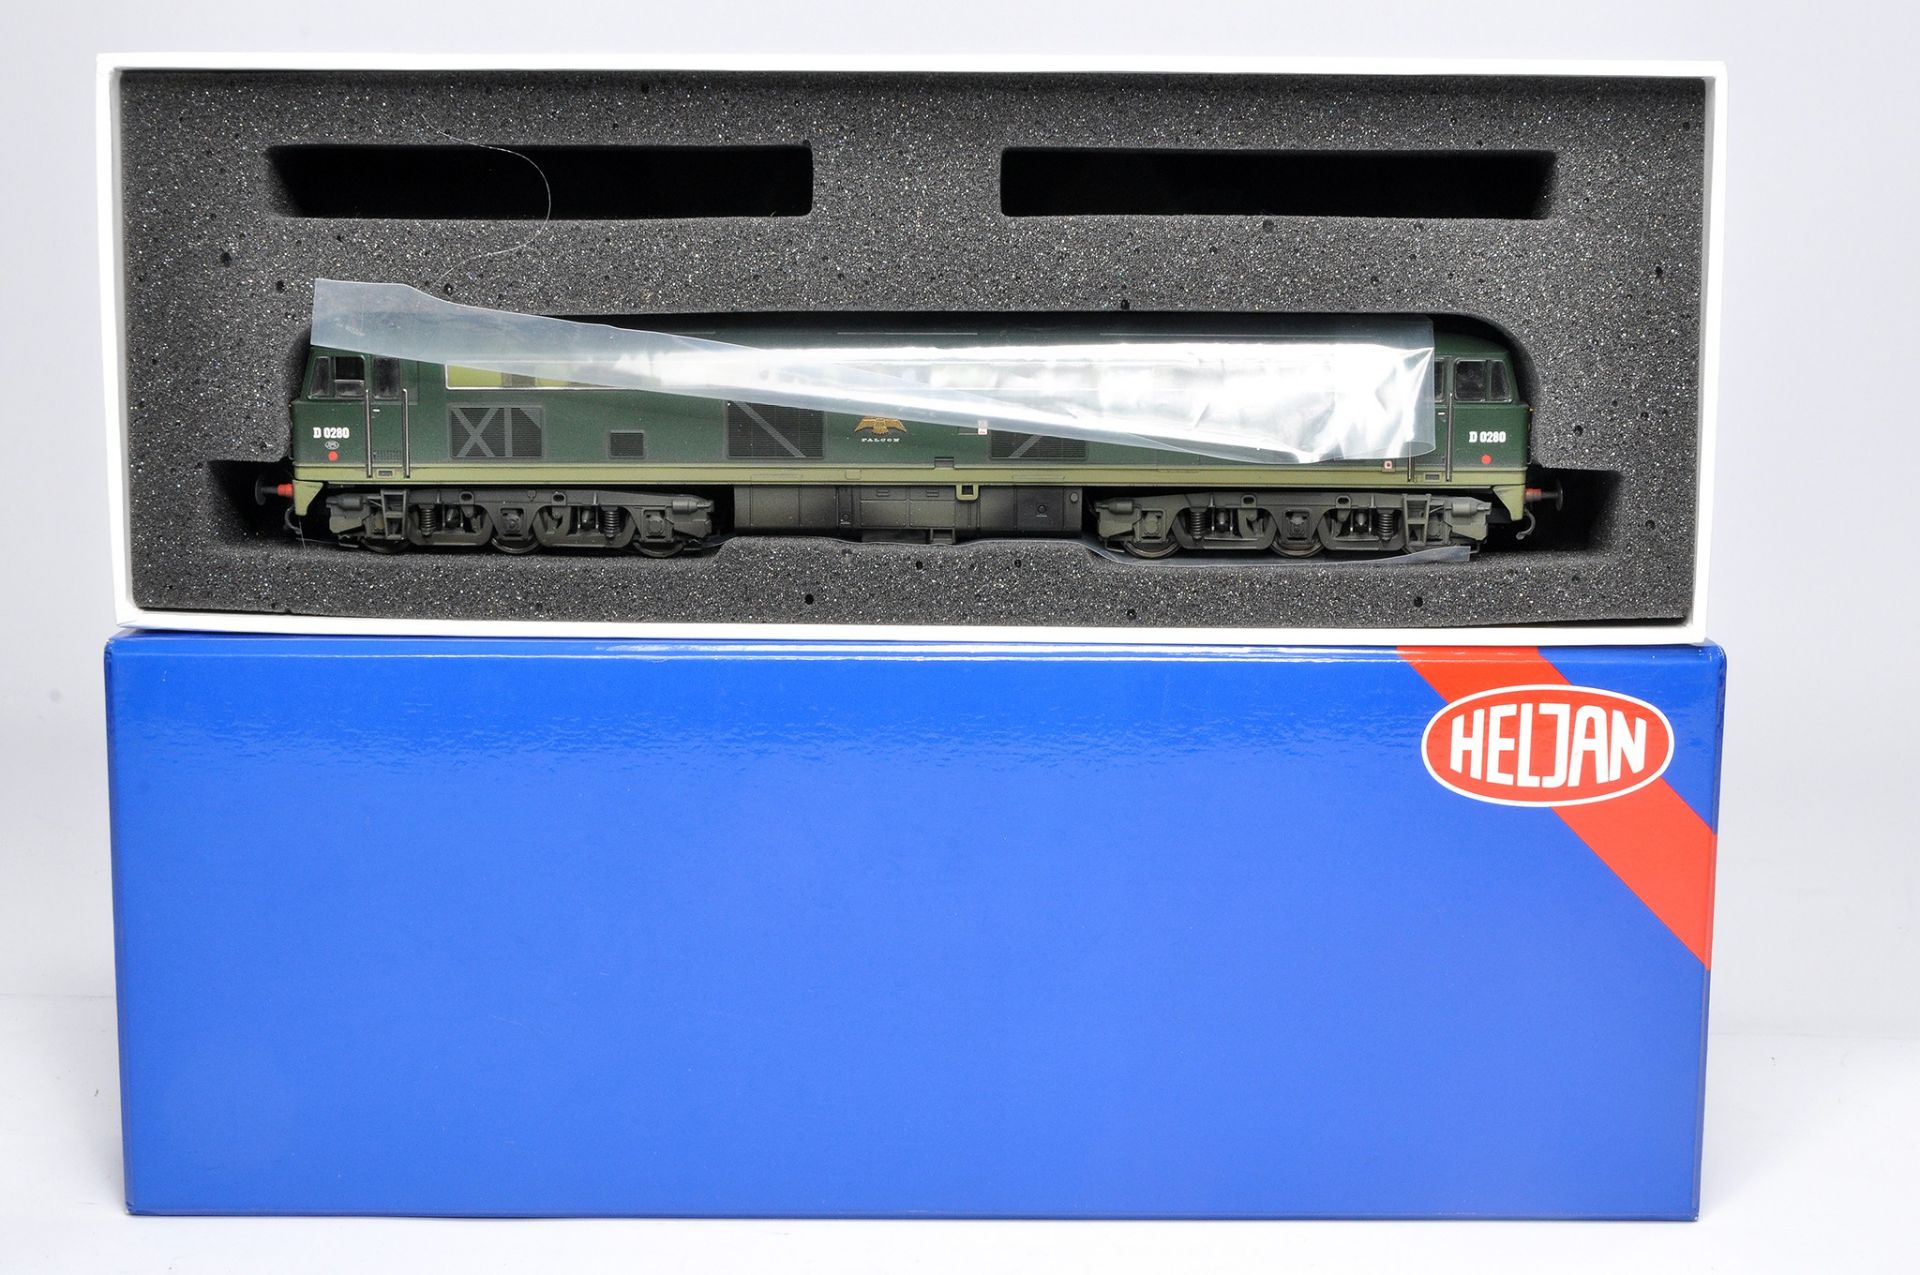 Heljan Model Railway comprising locomotive issue No. 53011 Falcon D0280. Looks to be without obvious